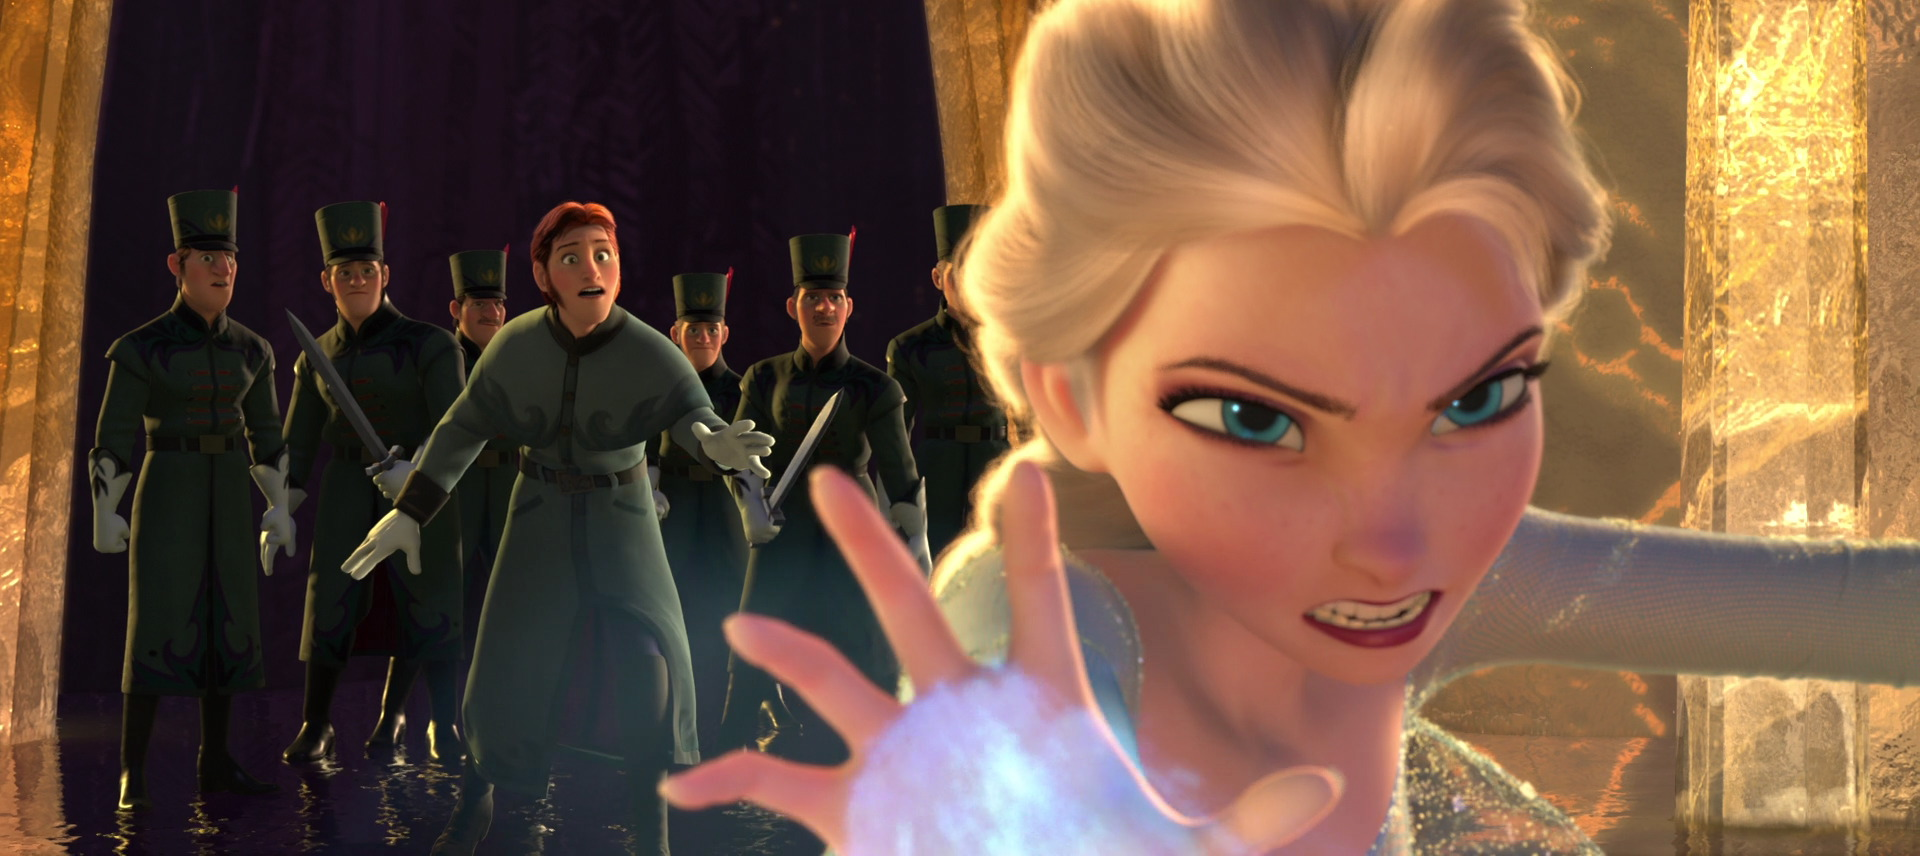 Prince Hans' Return In Frozen 3 Would Fix 2 Franchise Problems - IMDb